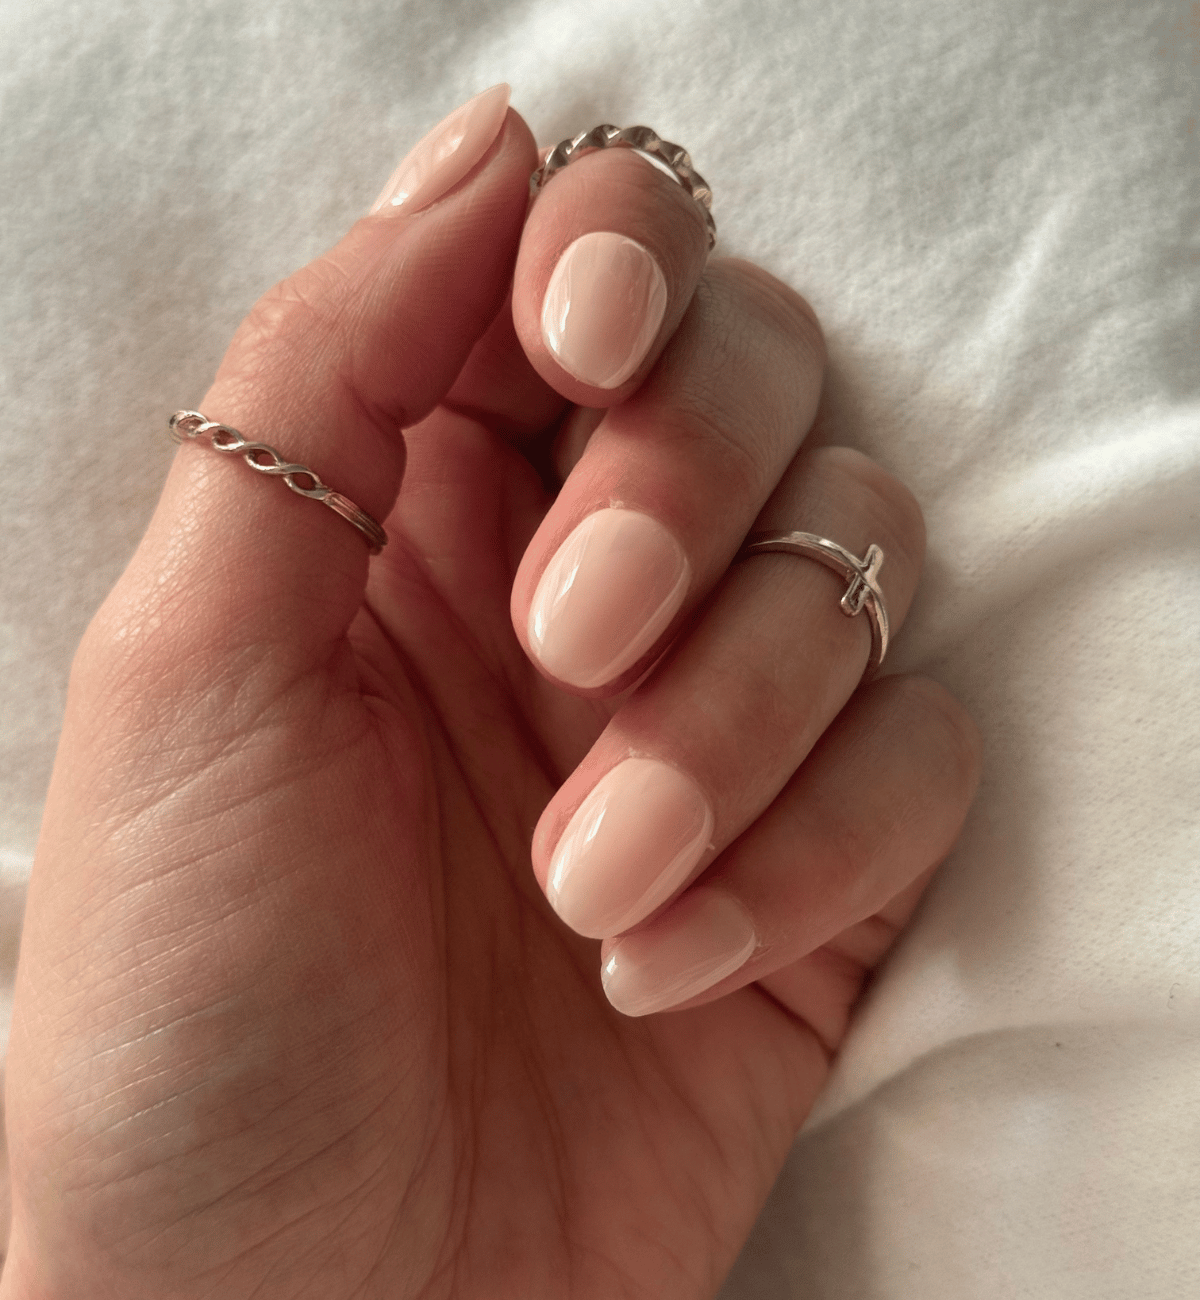 FAUX ONGLES ABRICOT NUDE ARRONDIS COURTS